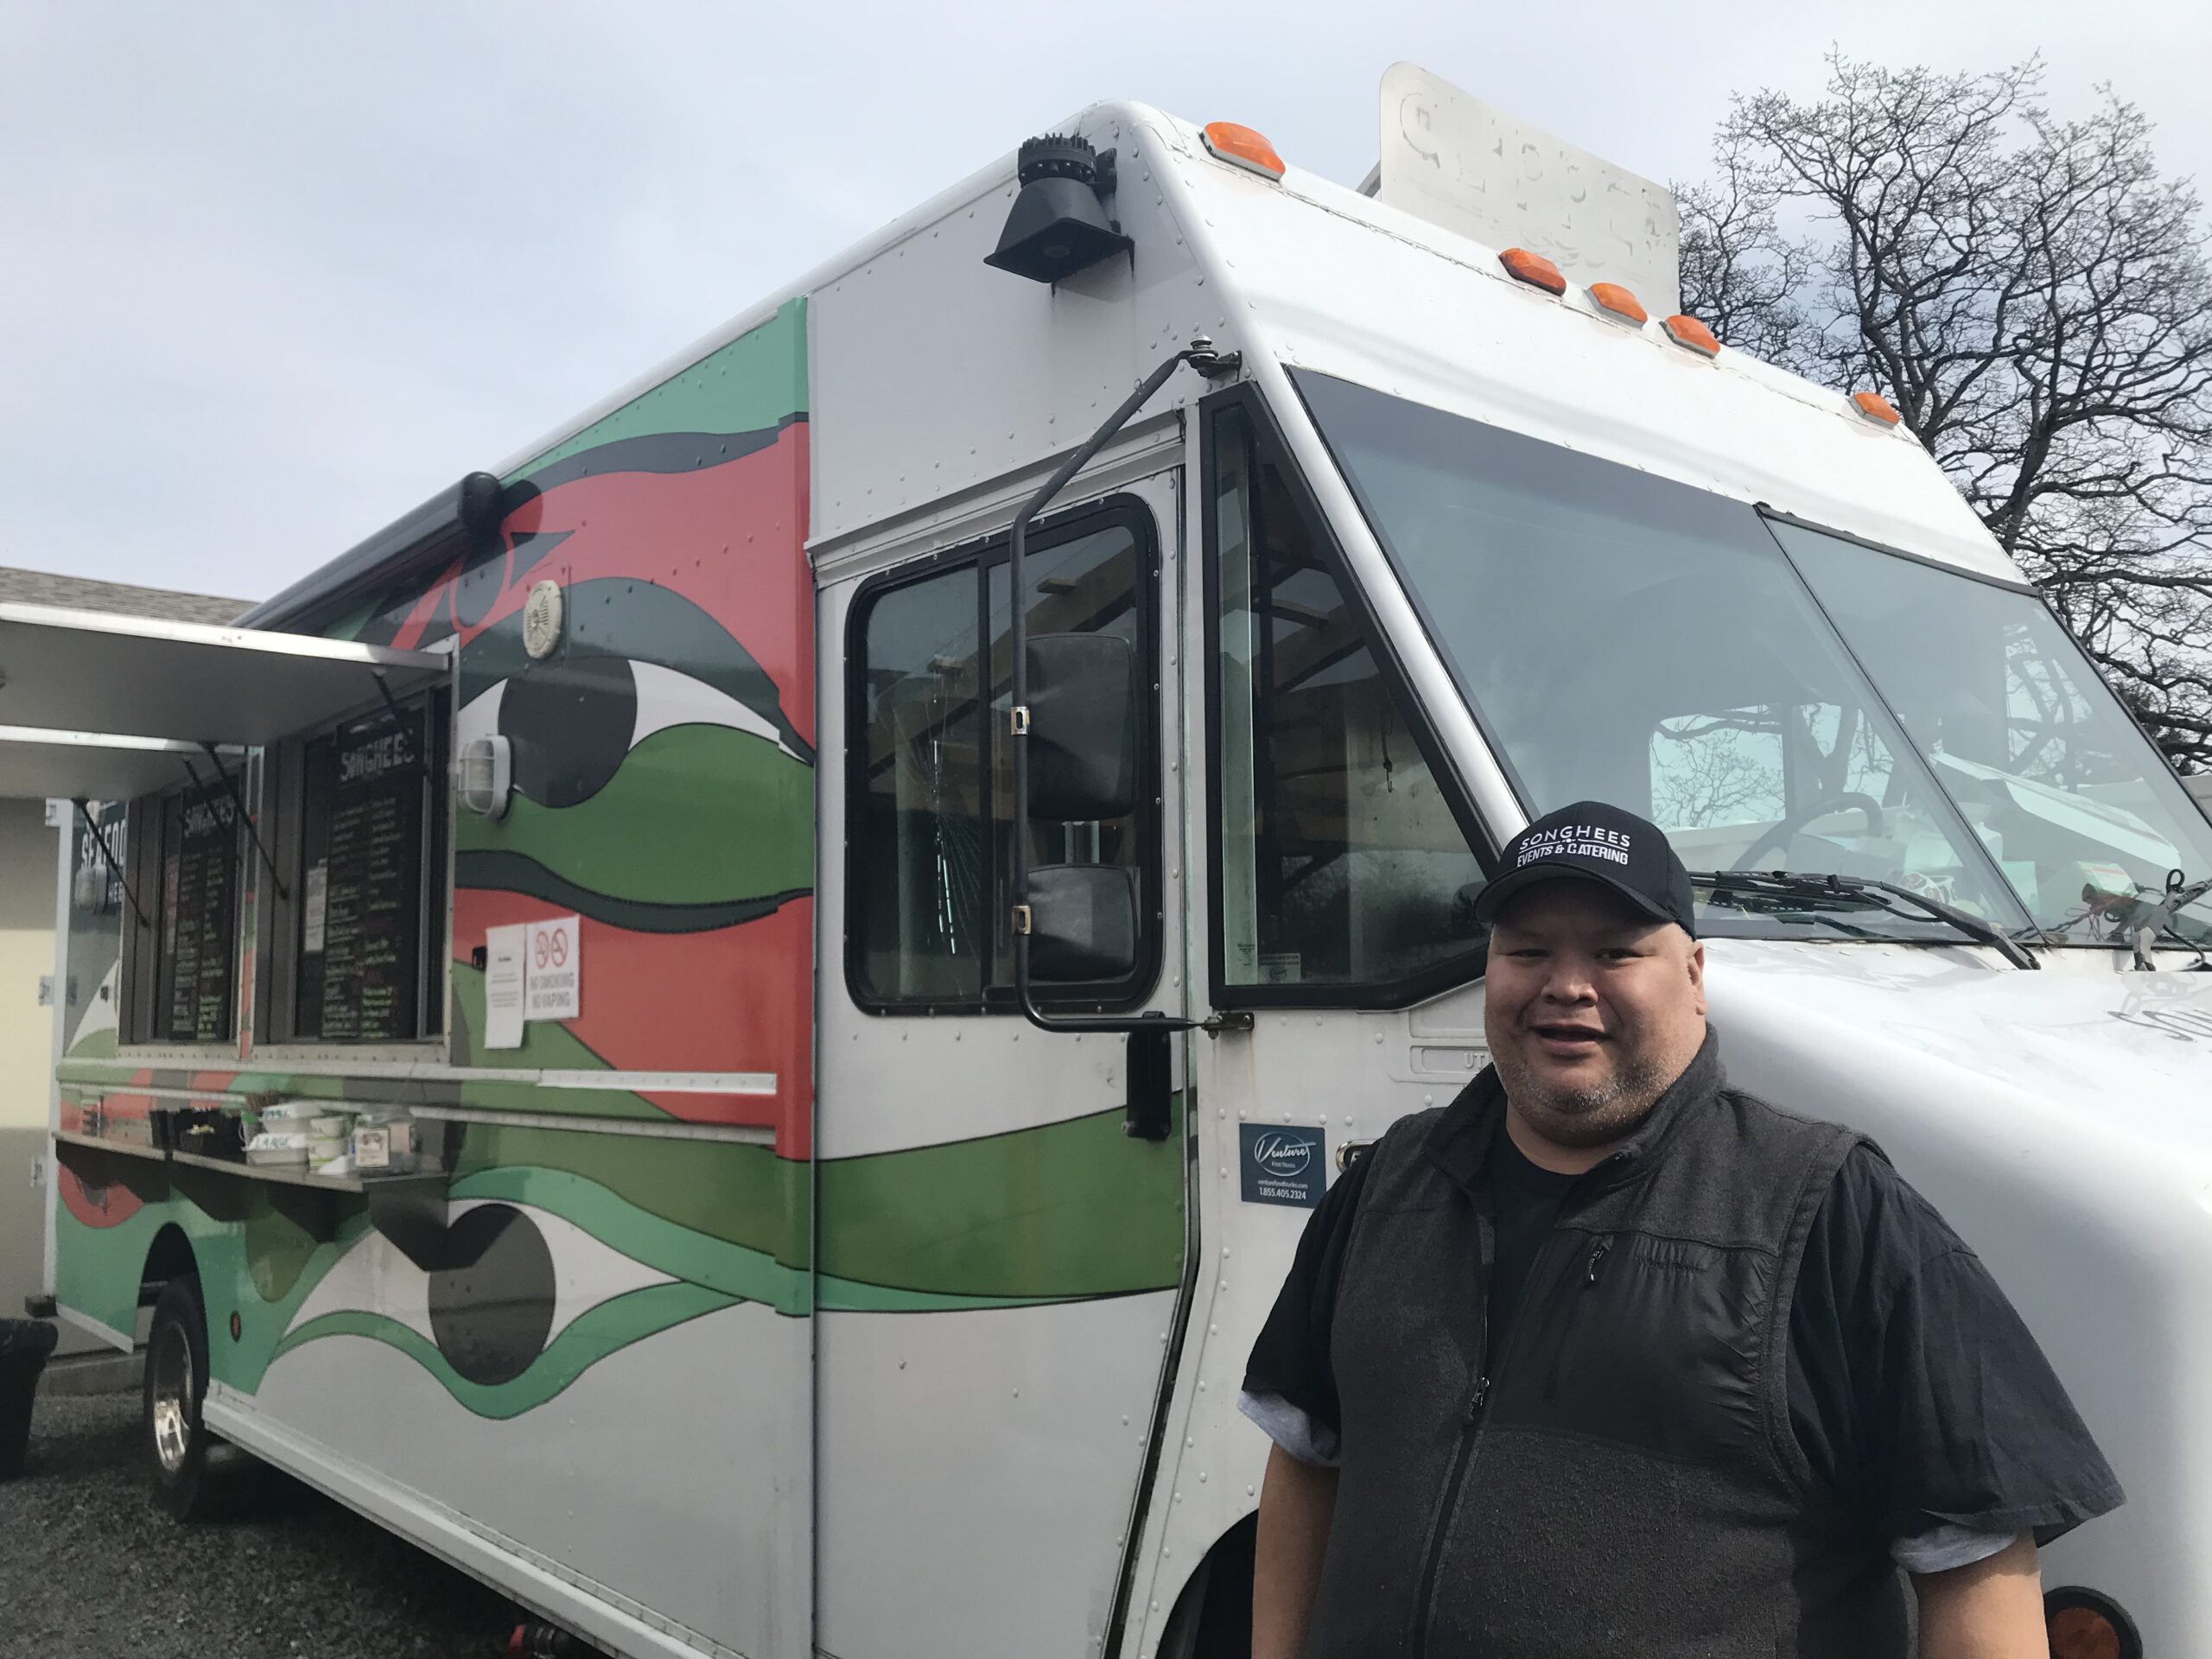 The Songhees Food Truck is a place for delicious food and good memories